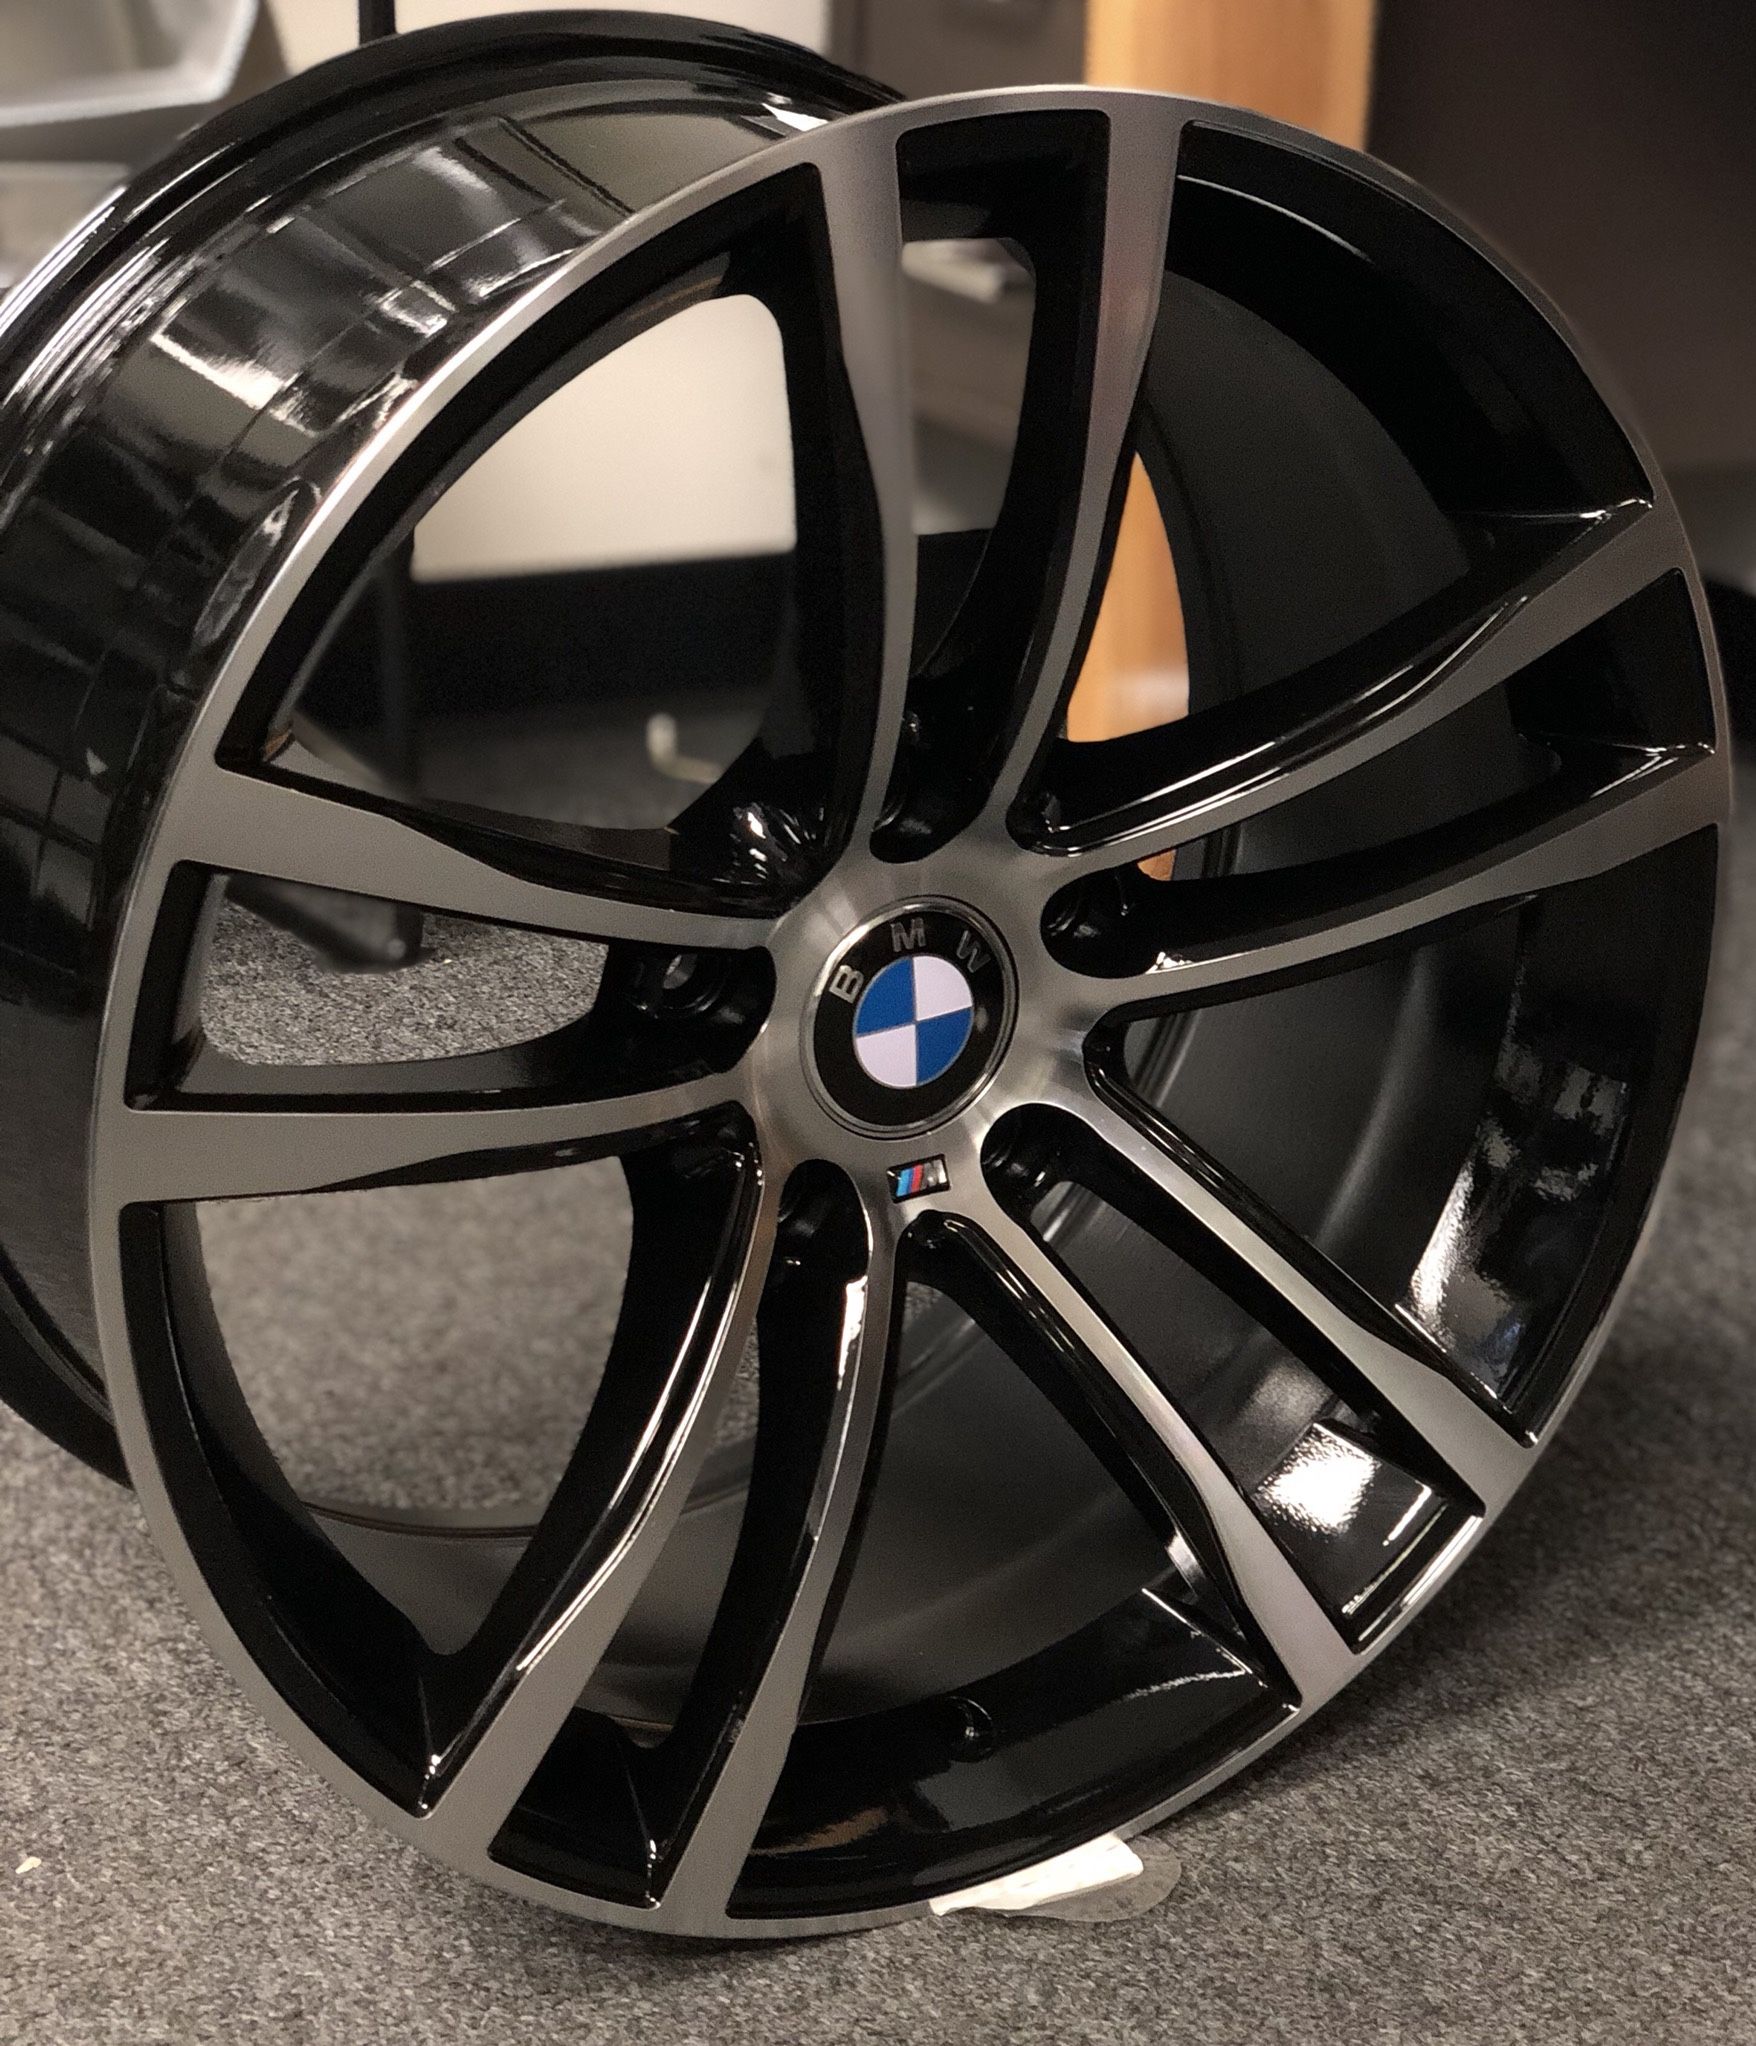 Brand New 18” Staggered BMW Style Wheels Black polished 5x120 All 4 Price Firm